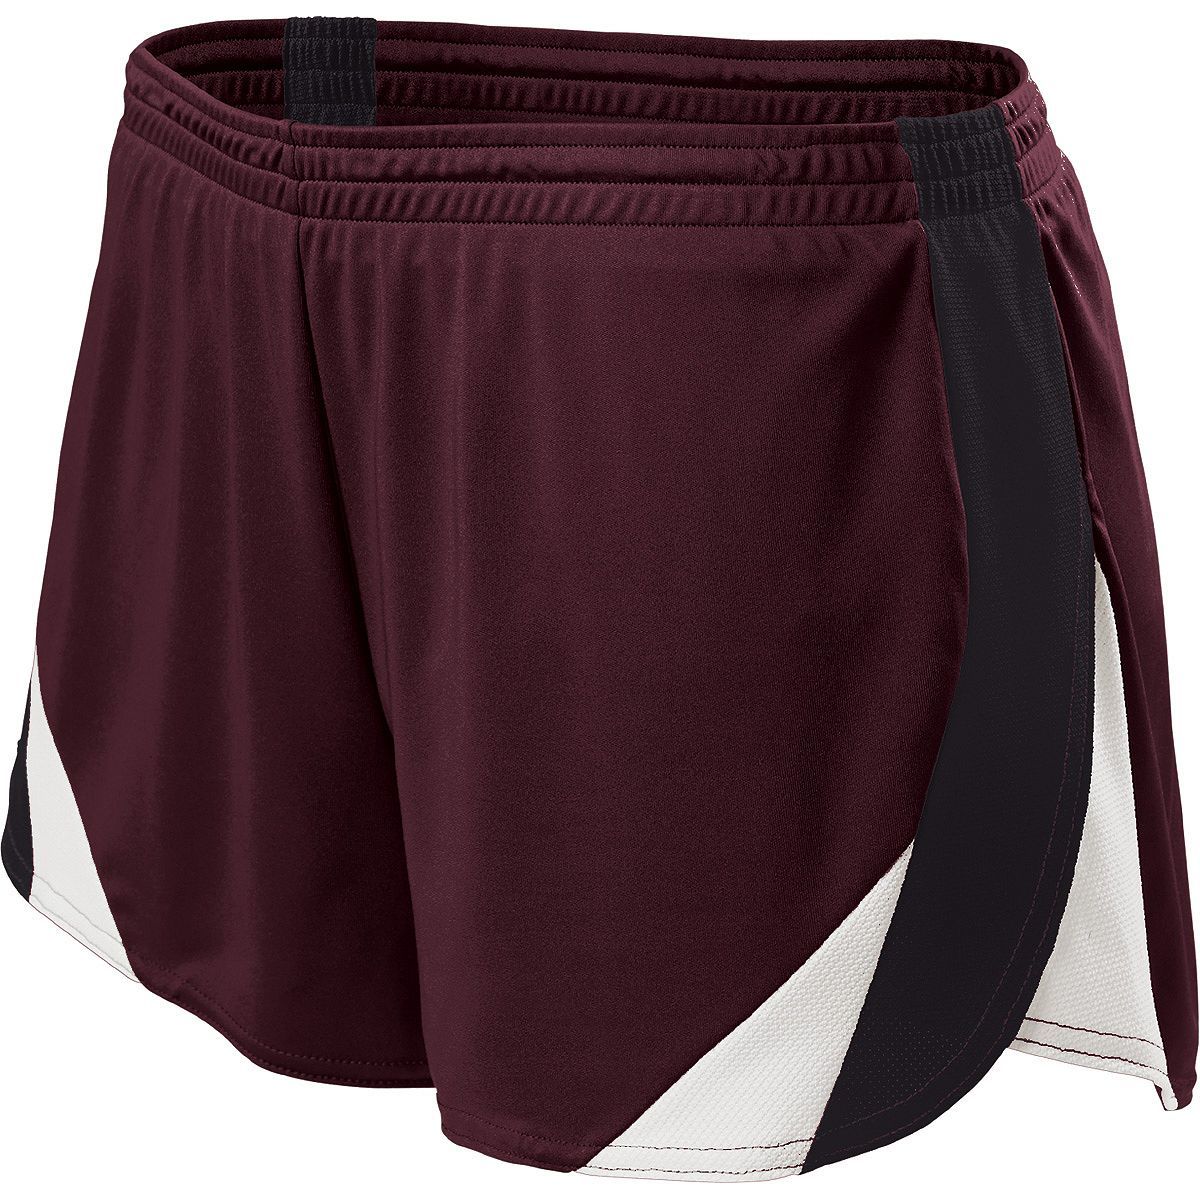 Holloway Ladies Approach Shorts in Dark Maroon/Black/White  -Part of the Ladies, Ladies-Shorts, Track-Field, Holloway product lines at KanaleyCreations.com